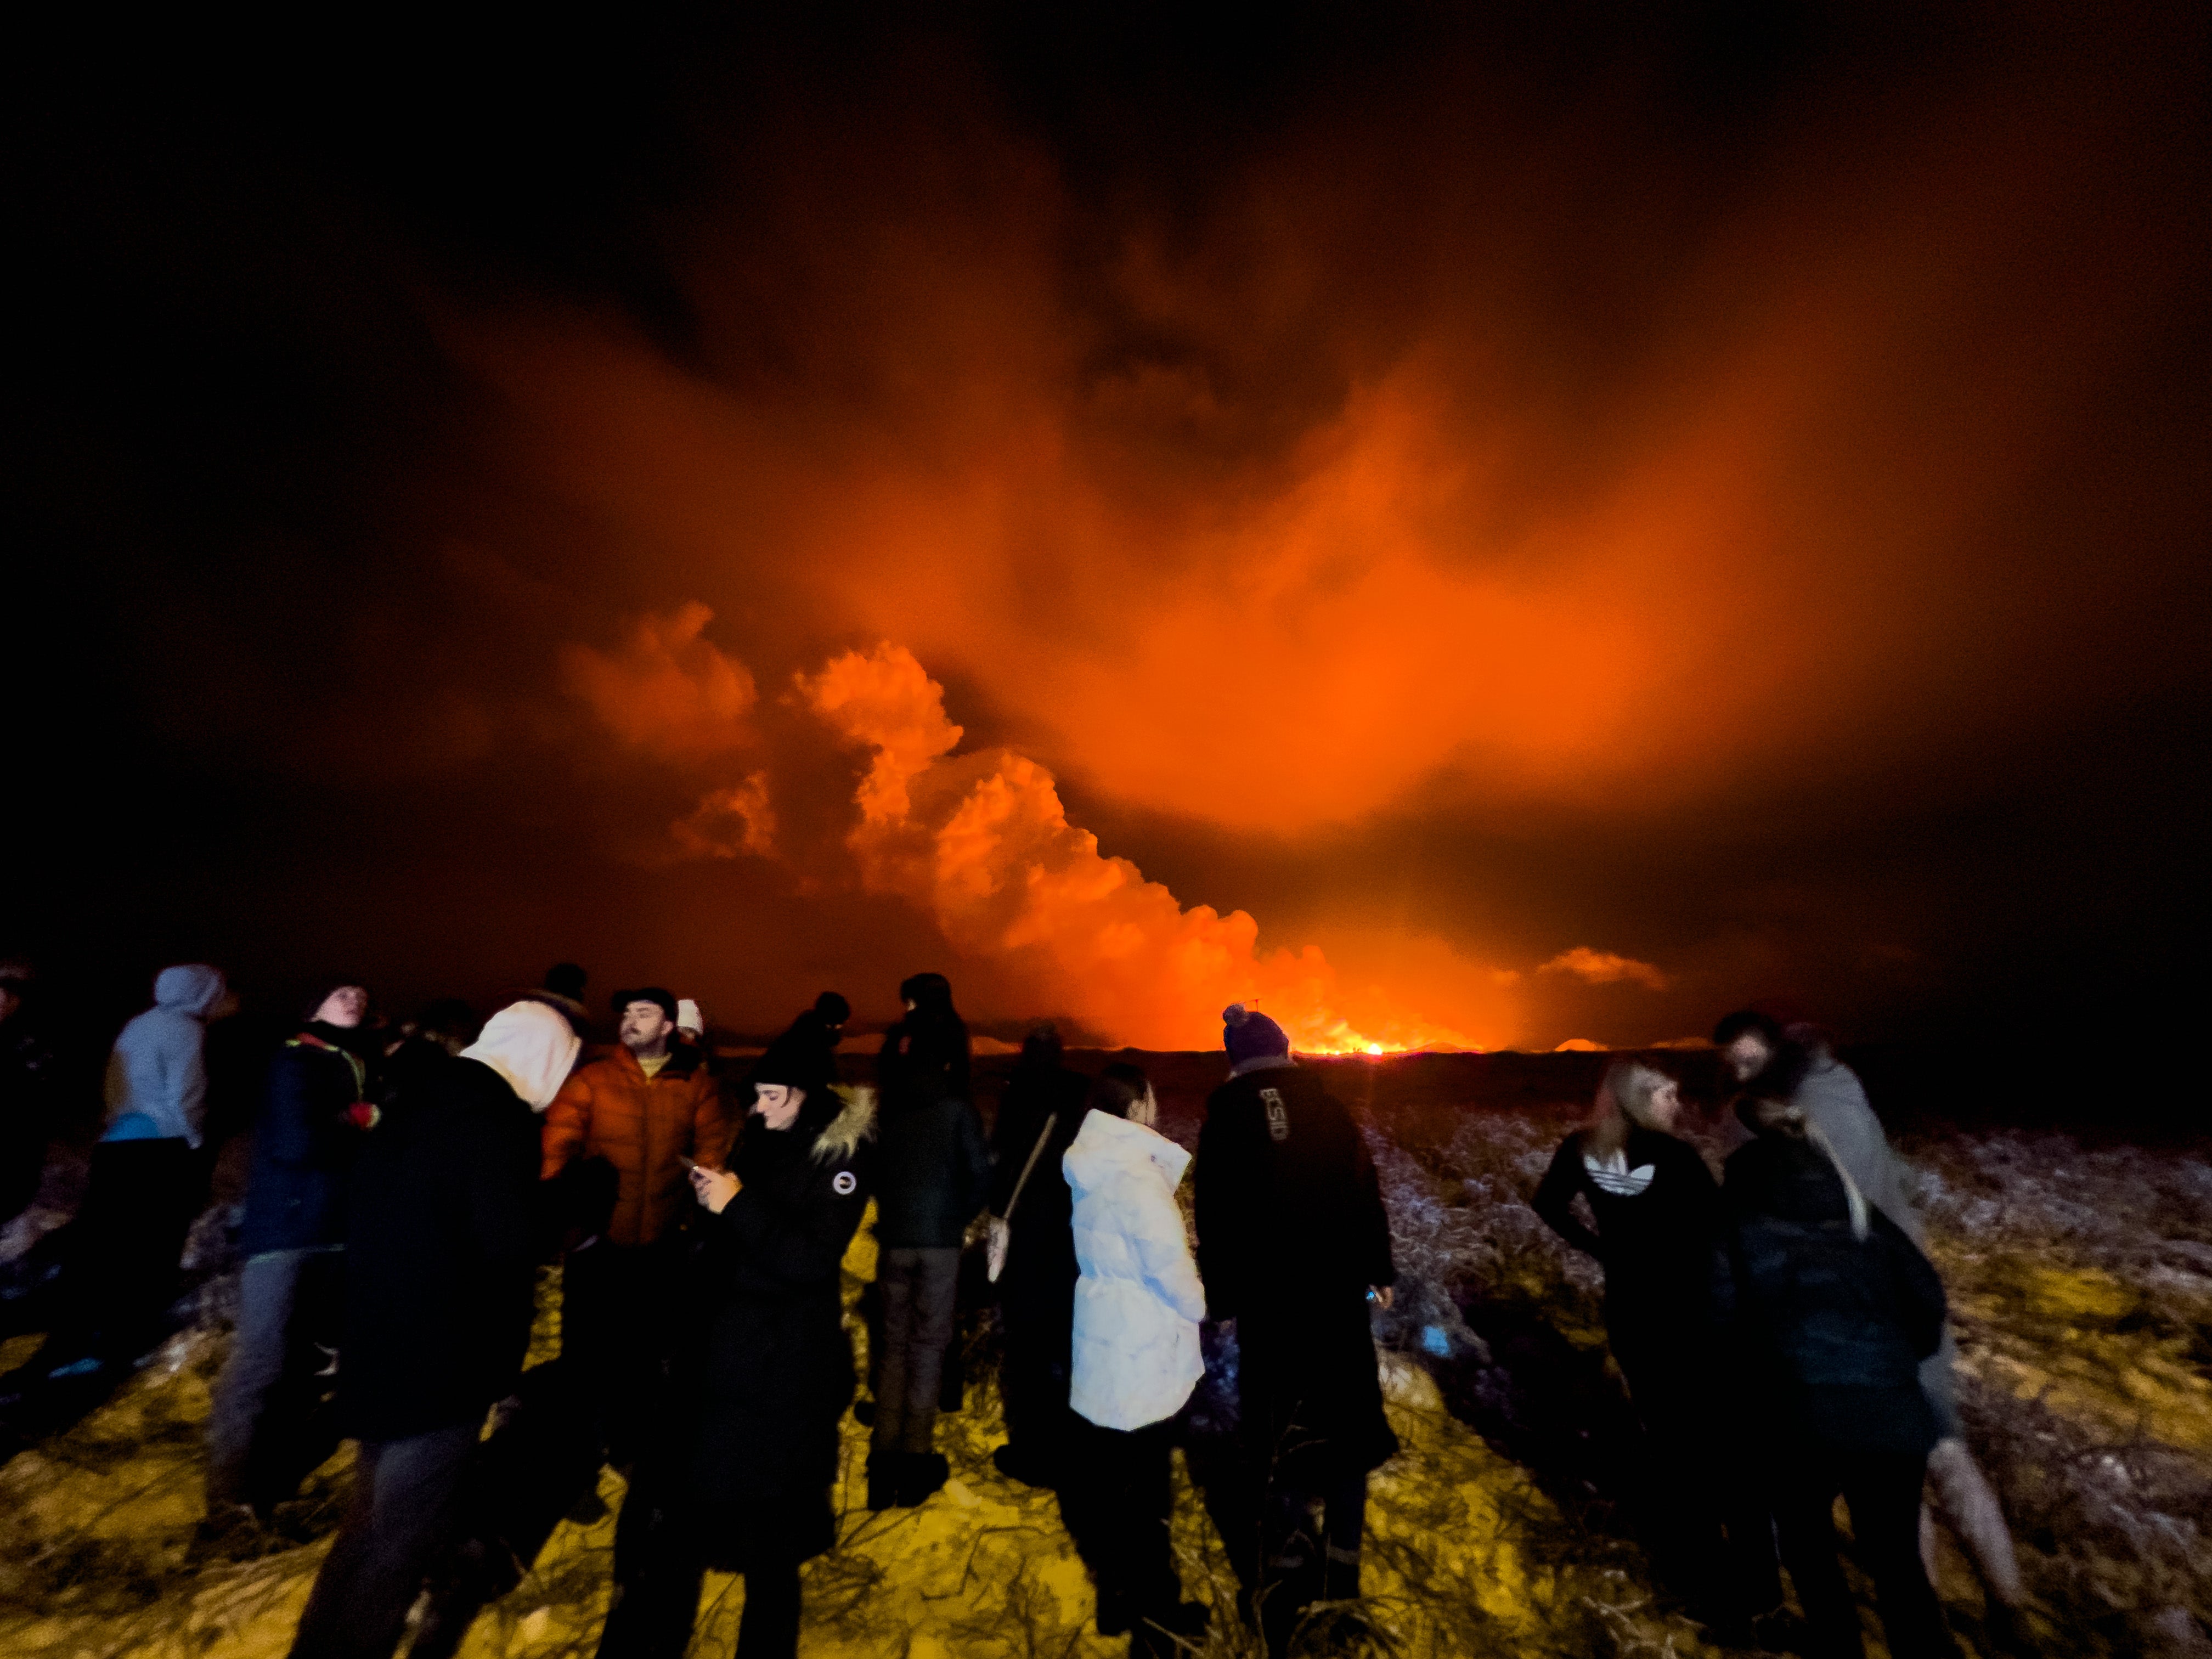 The Icelandic government warned spectators ‘considerable toxic gases’ were being released and urged people to stay away from the ridge